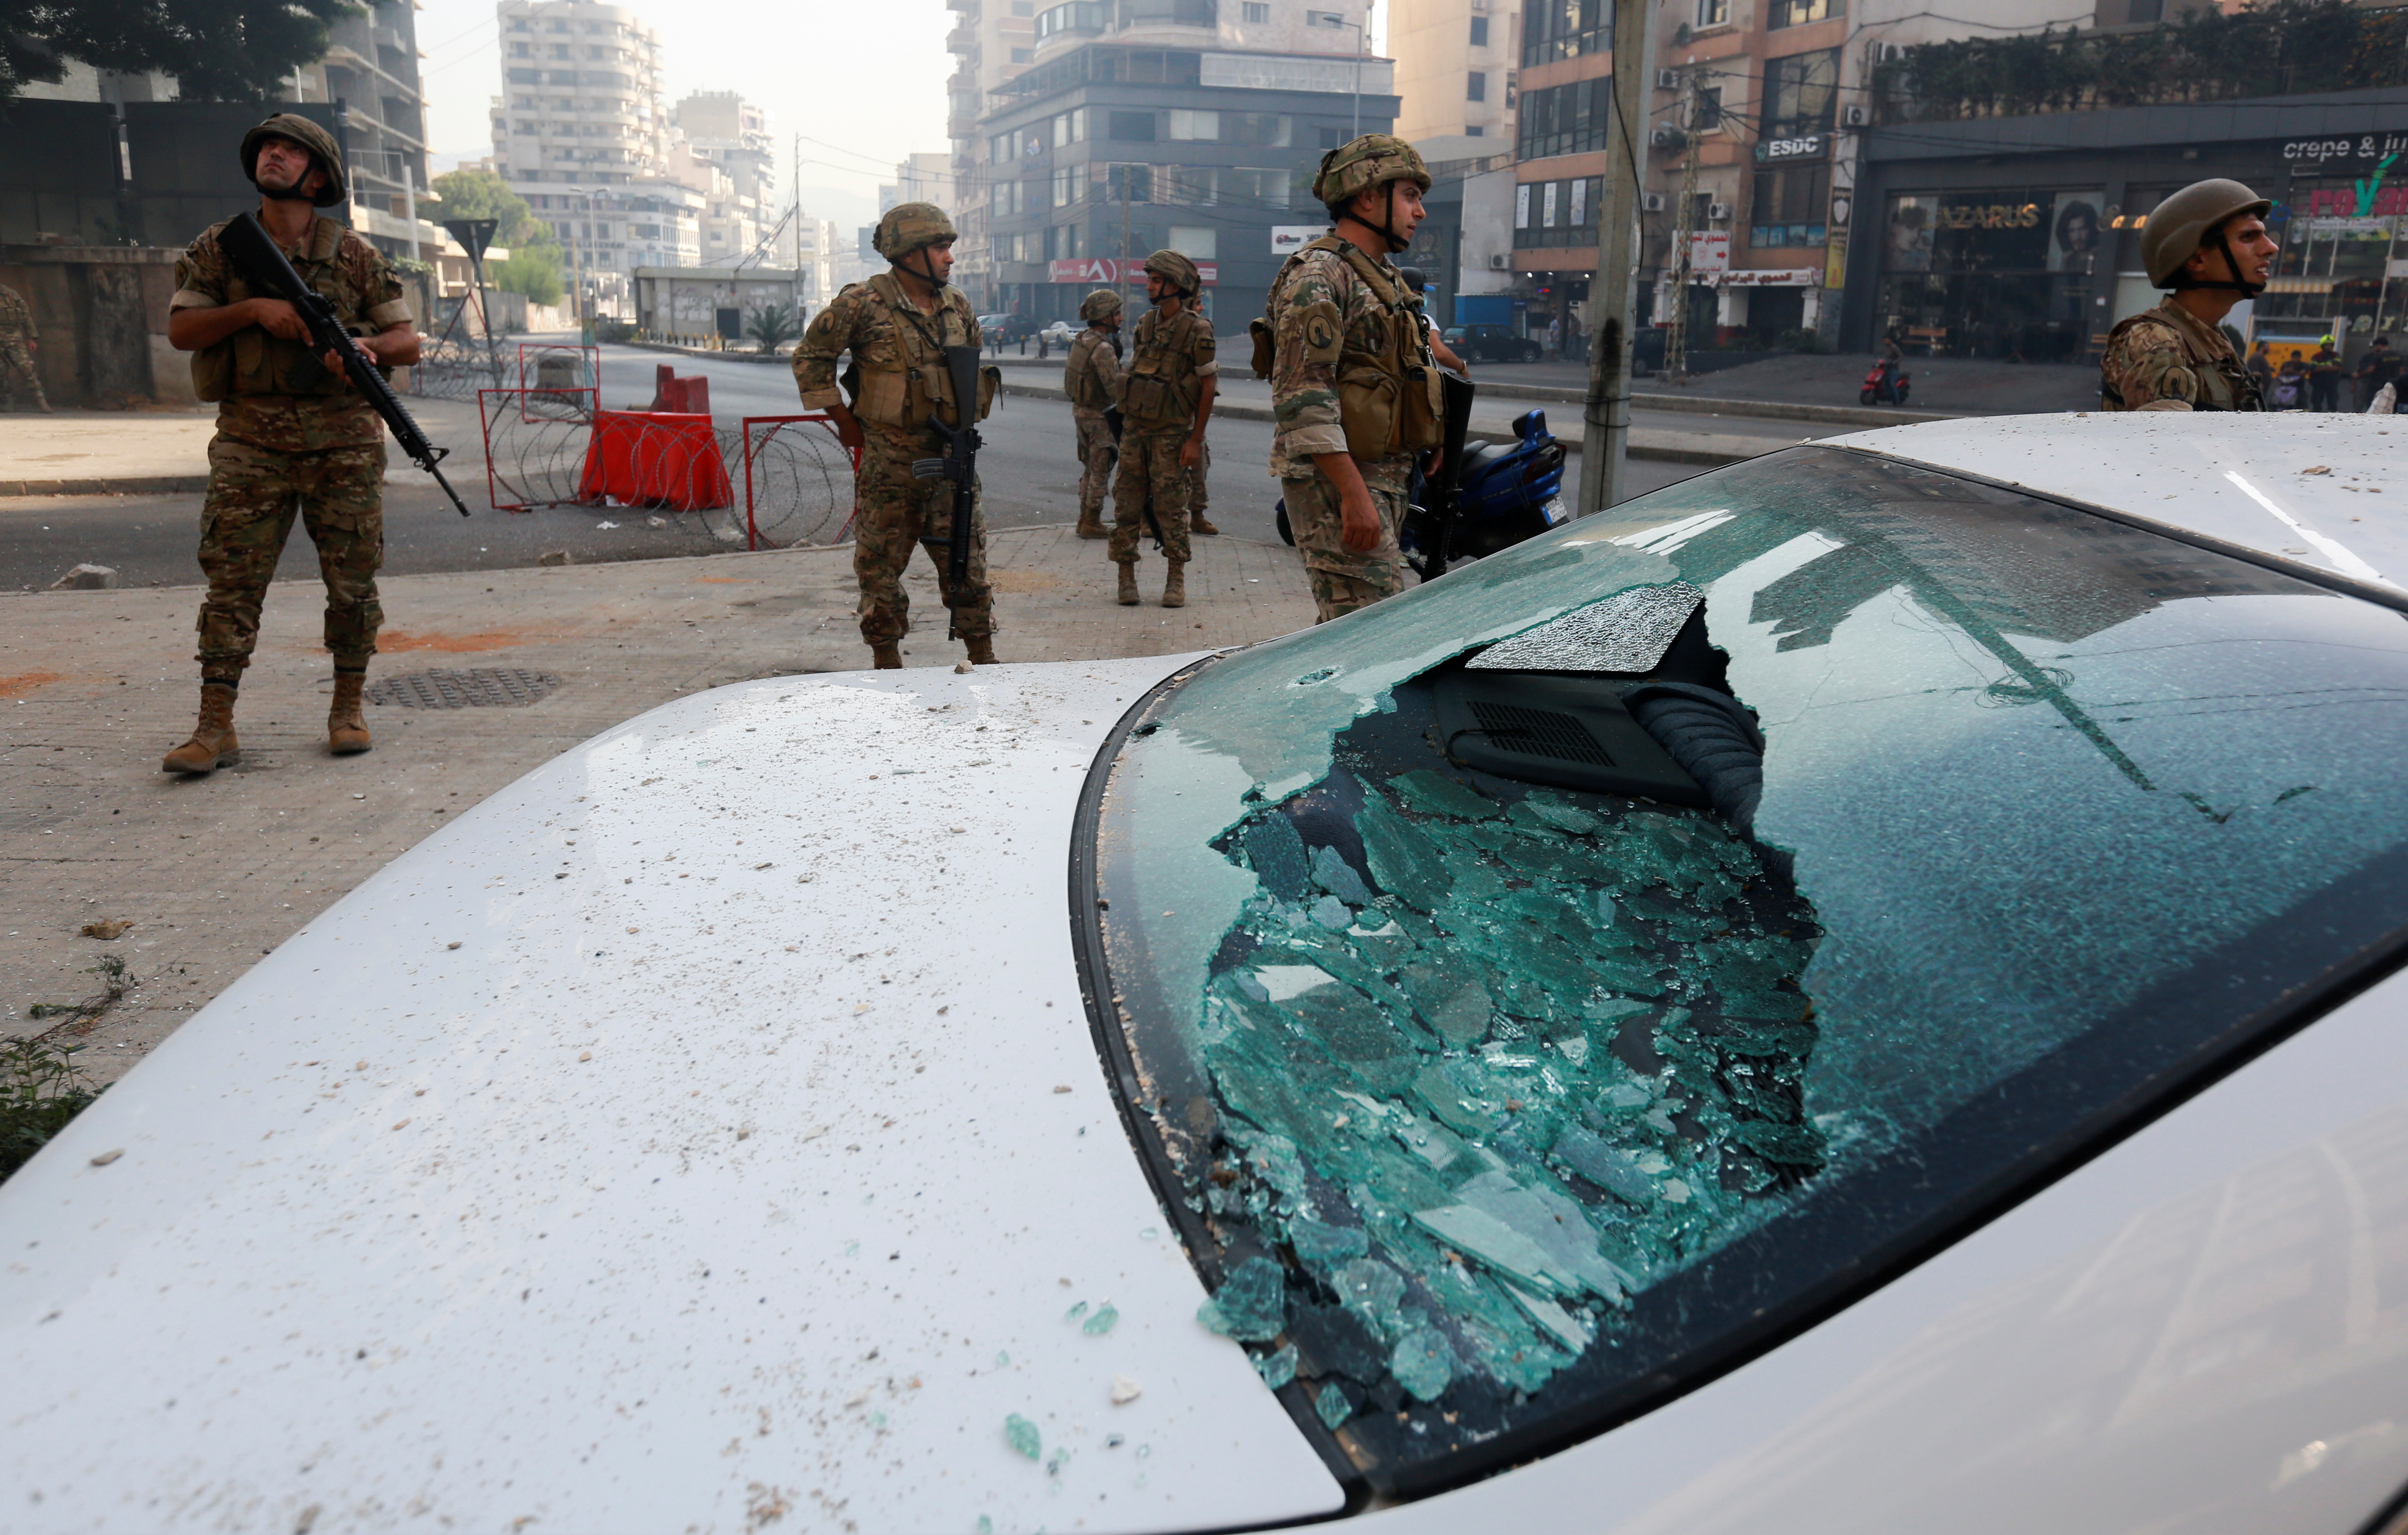 Army soldiers are deployed after gunfire erupted in Beirut